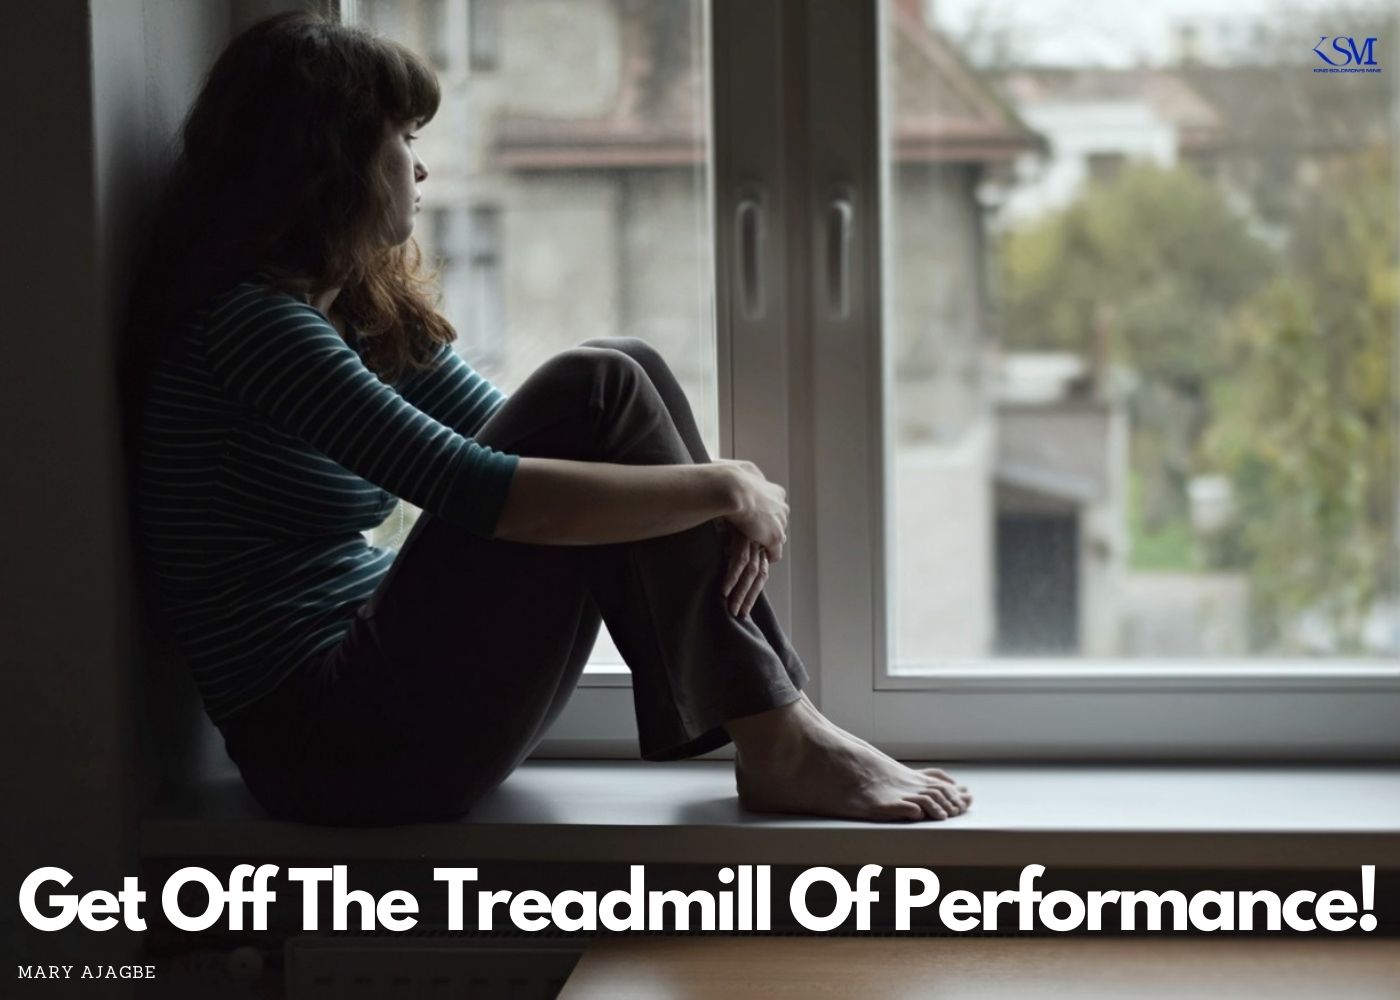 Get Off The Treadmill Of Performance!